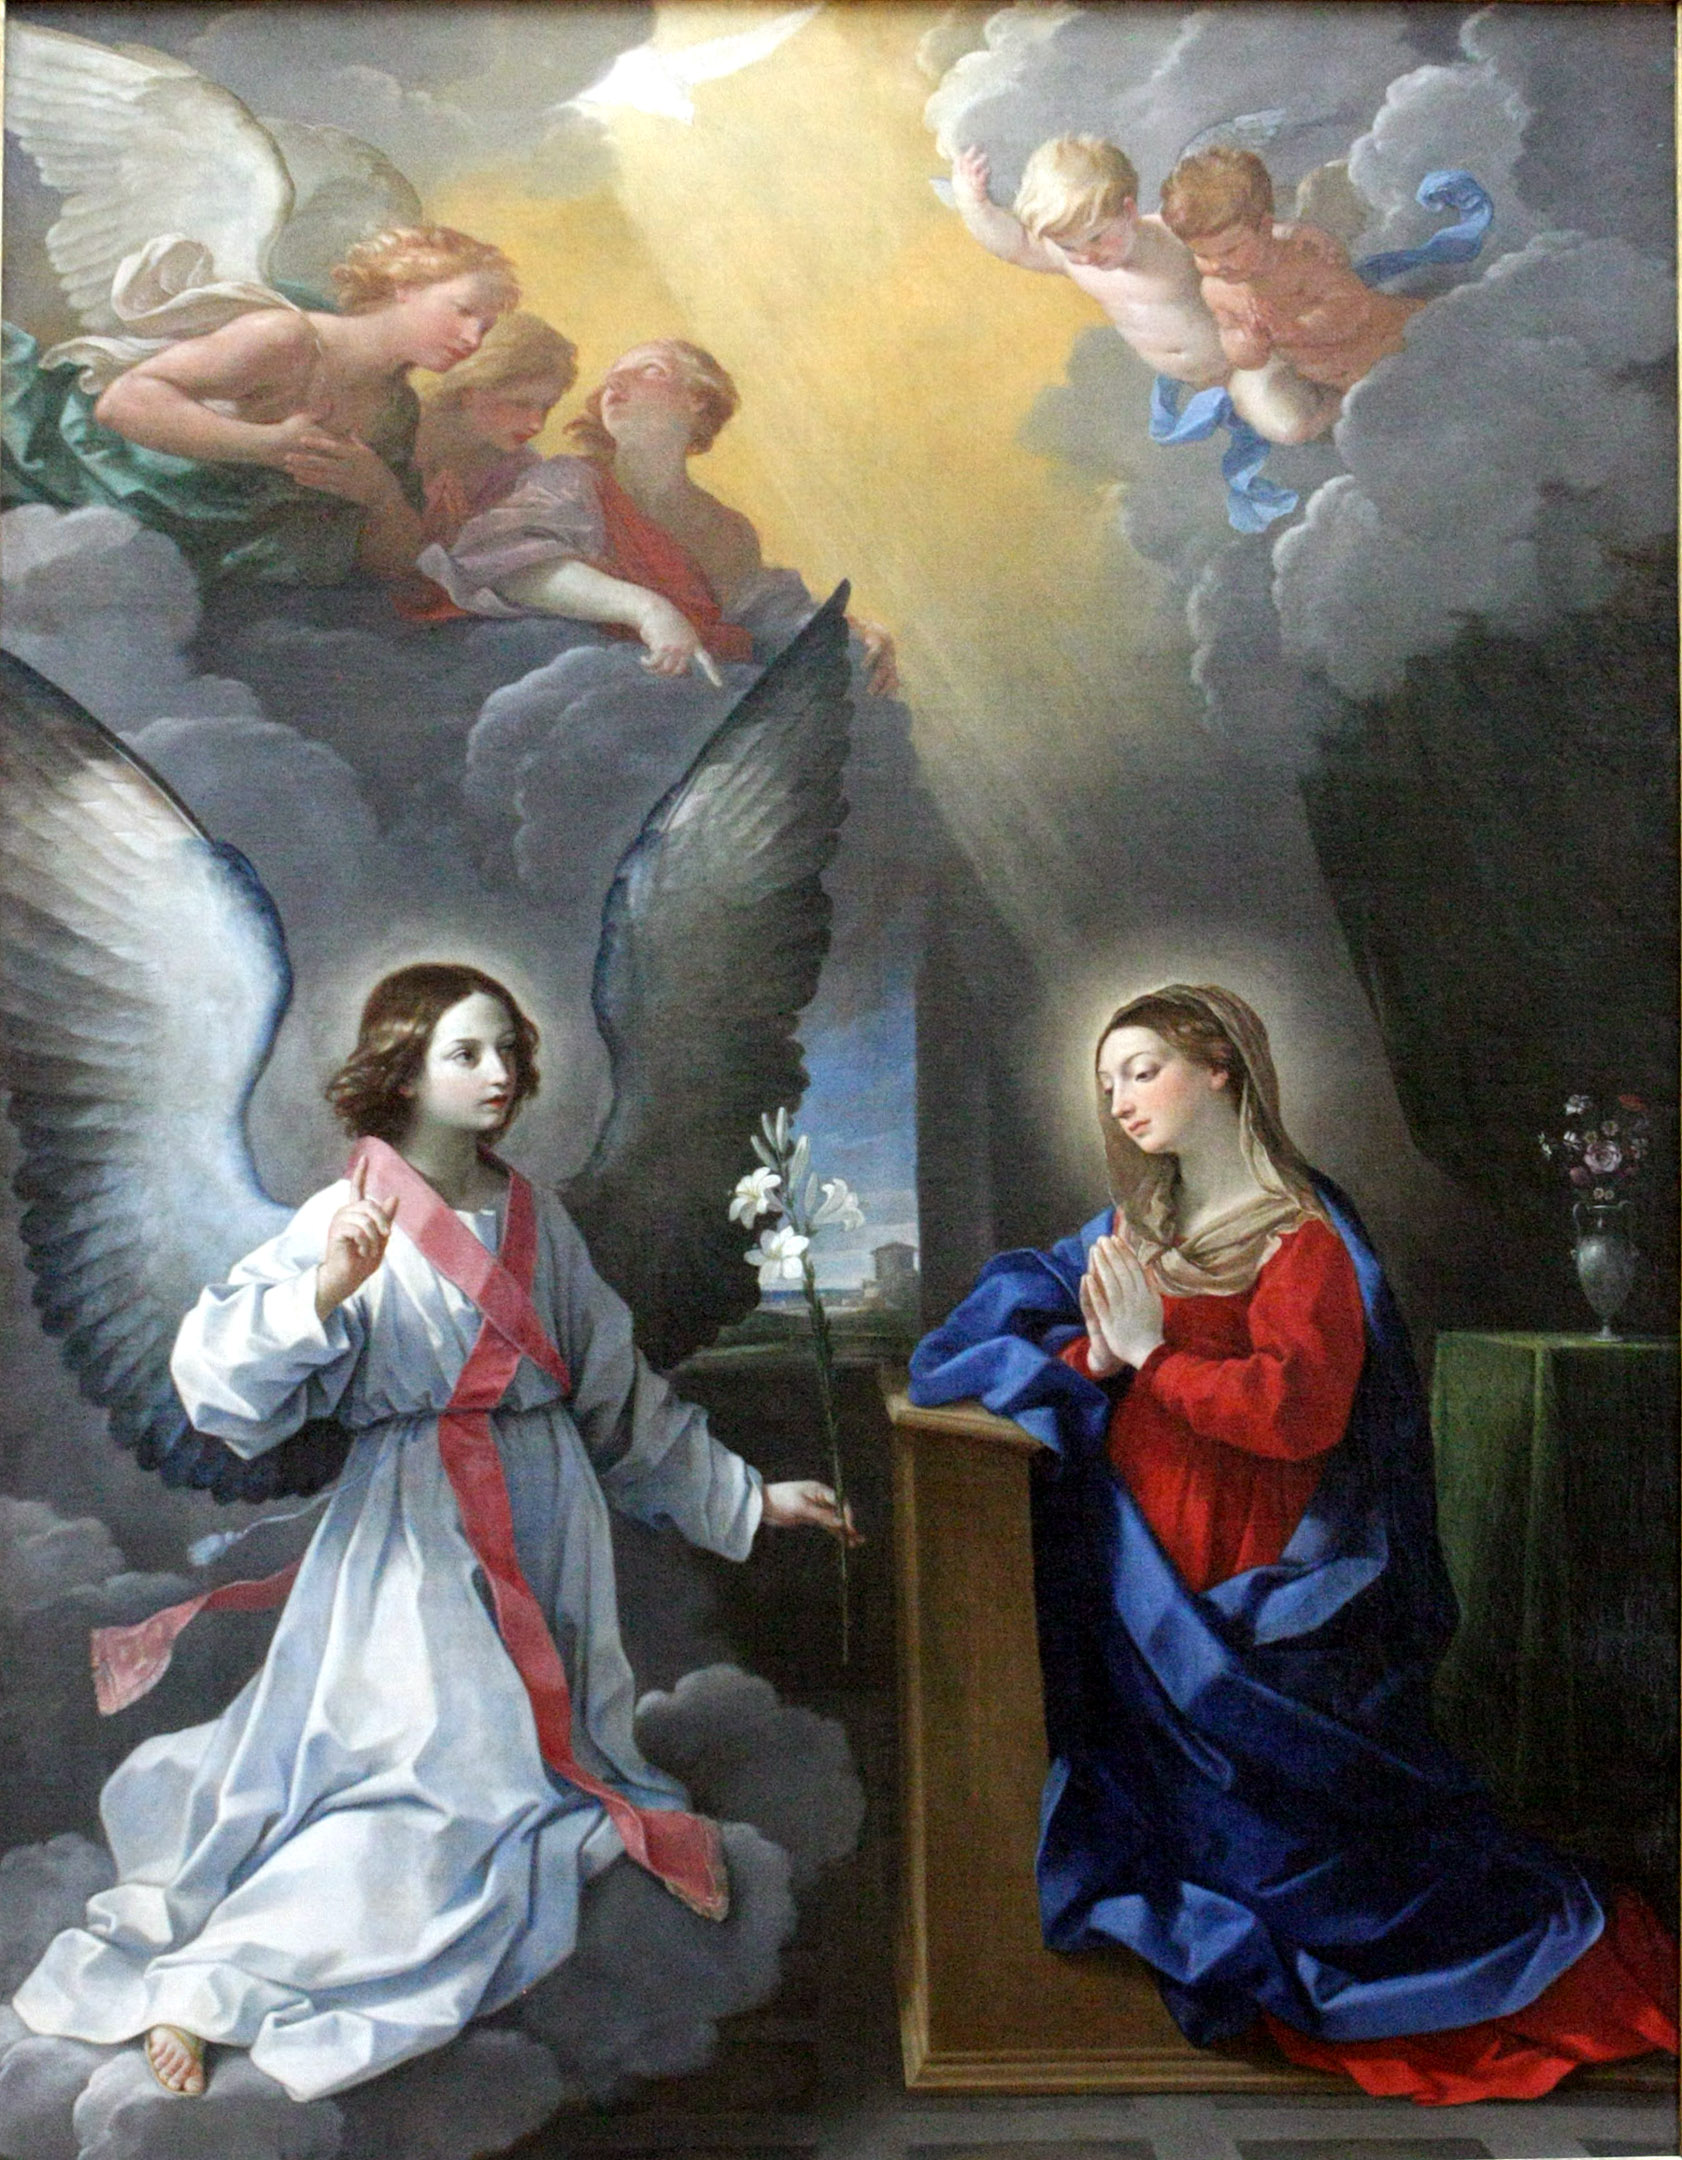 Gabriel made the personal choice of Joseph and Mary